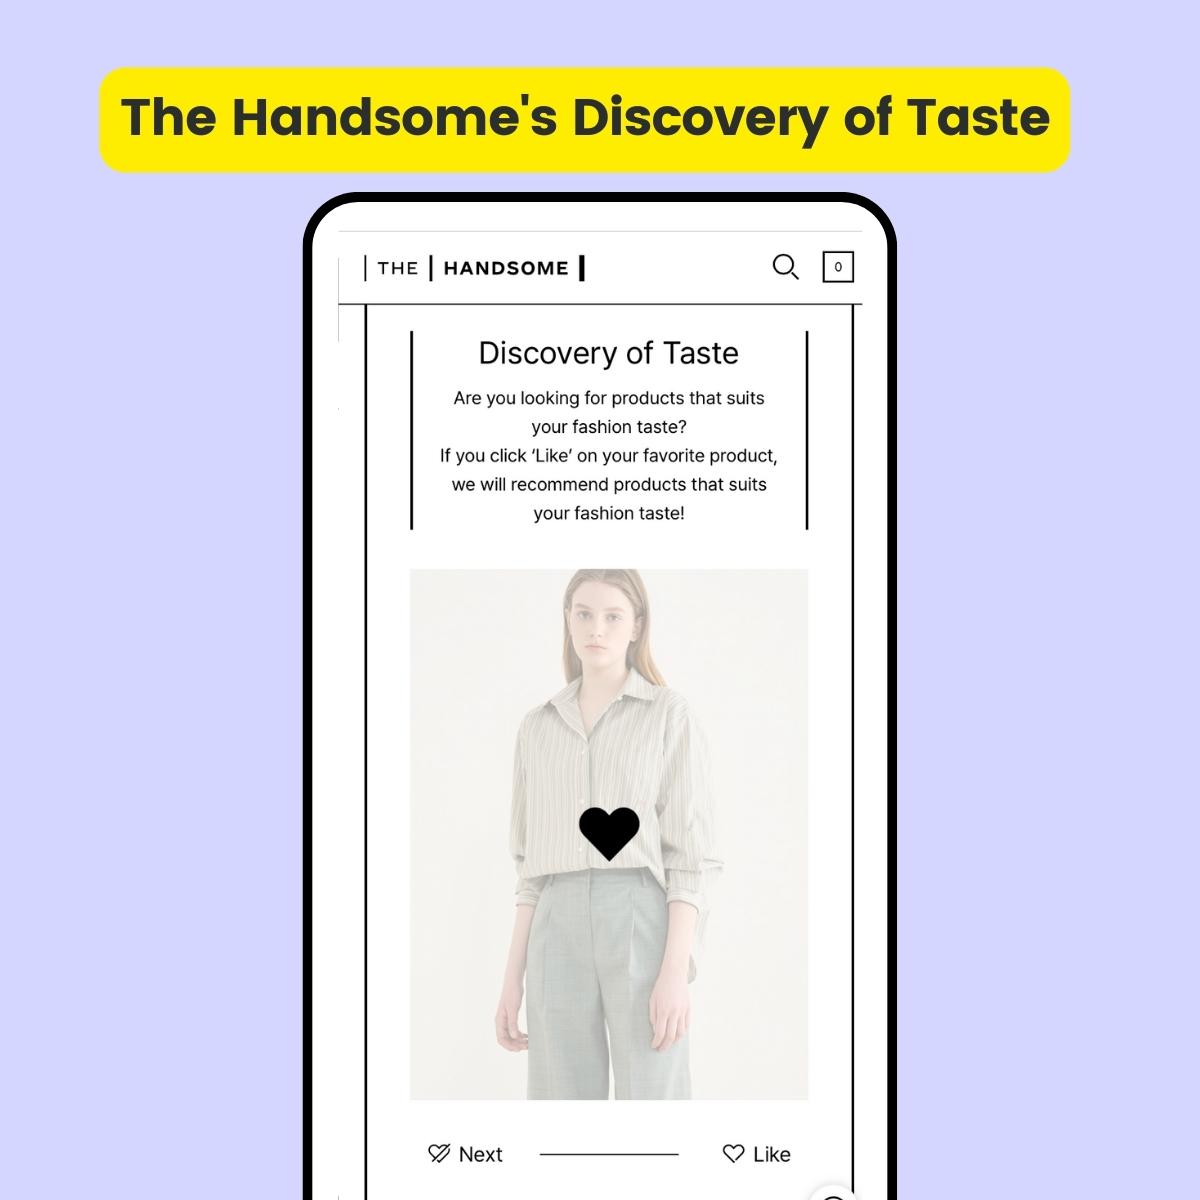 The Handsome's Discovery of Taste collaboration with YesPlz AI